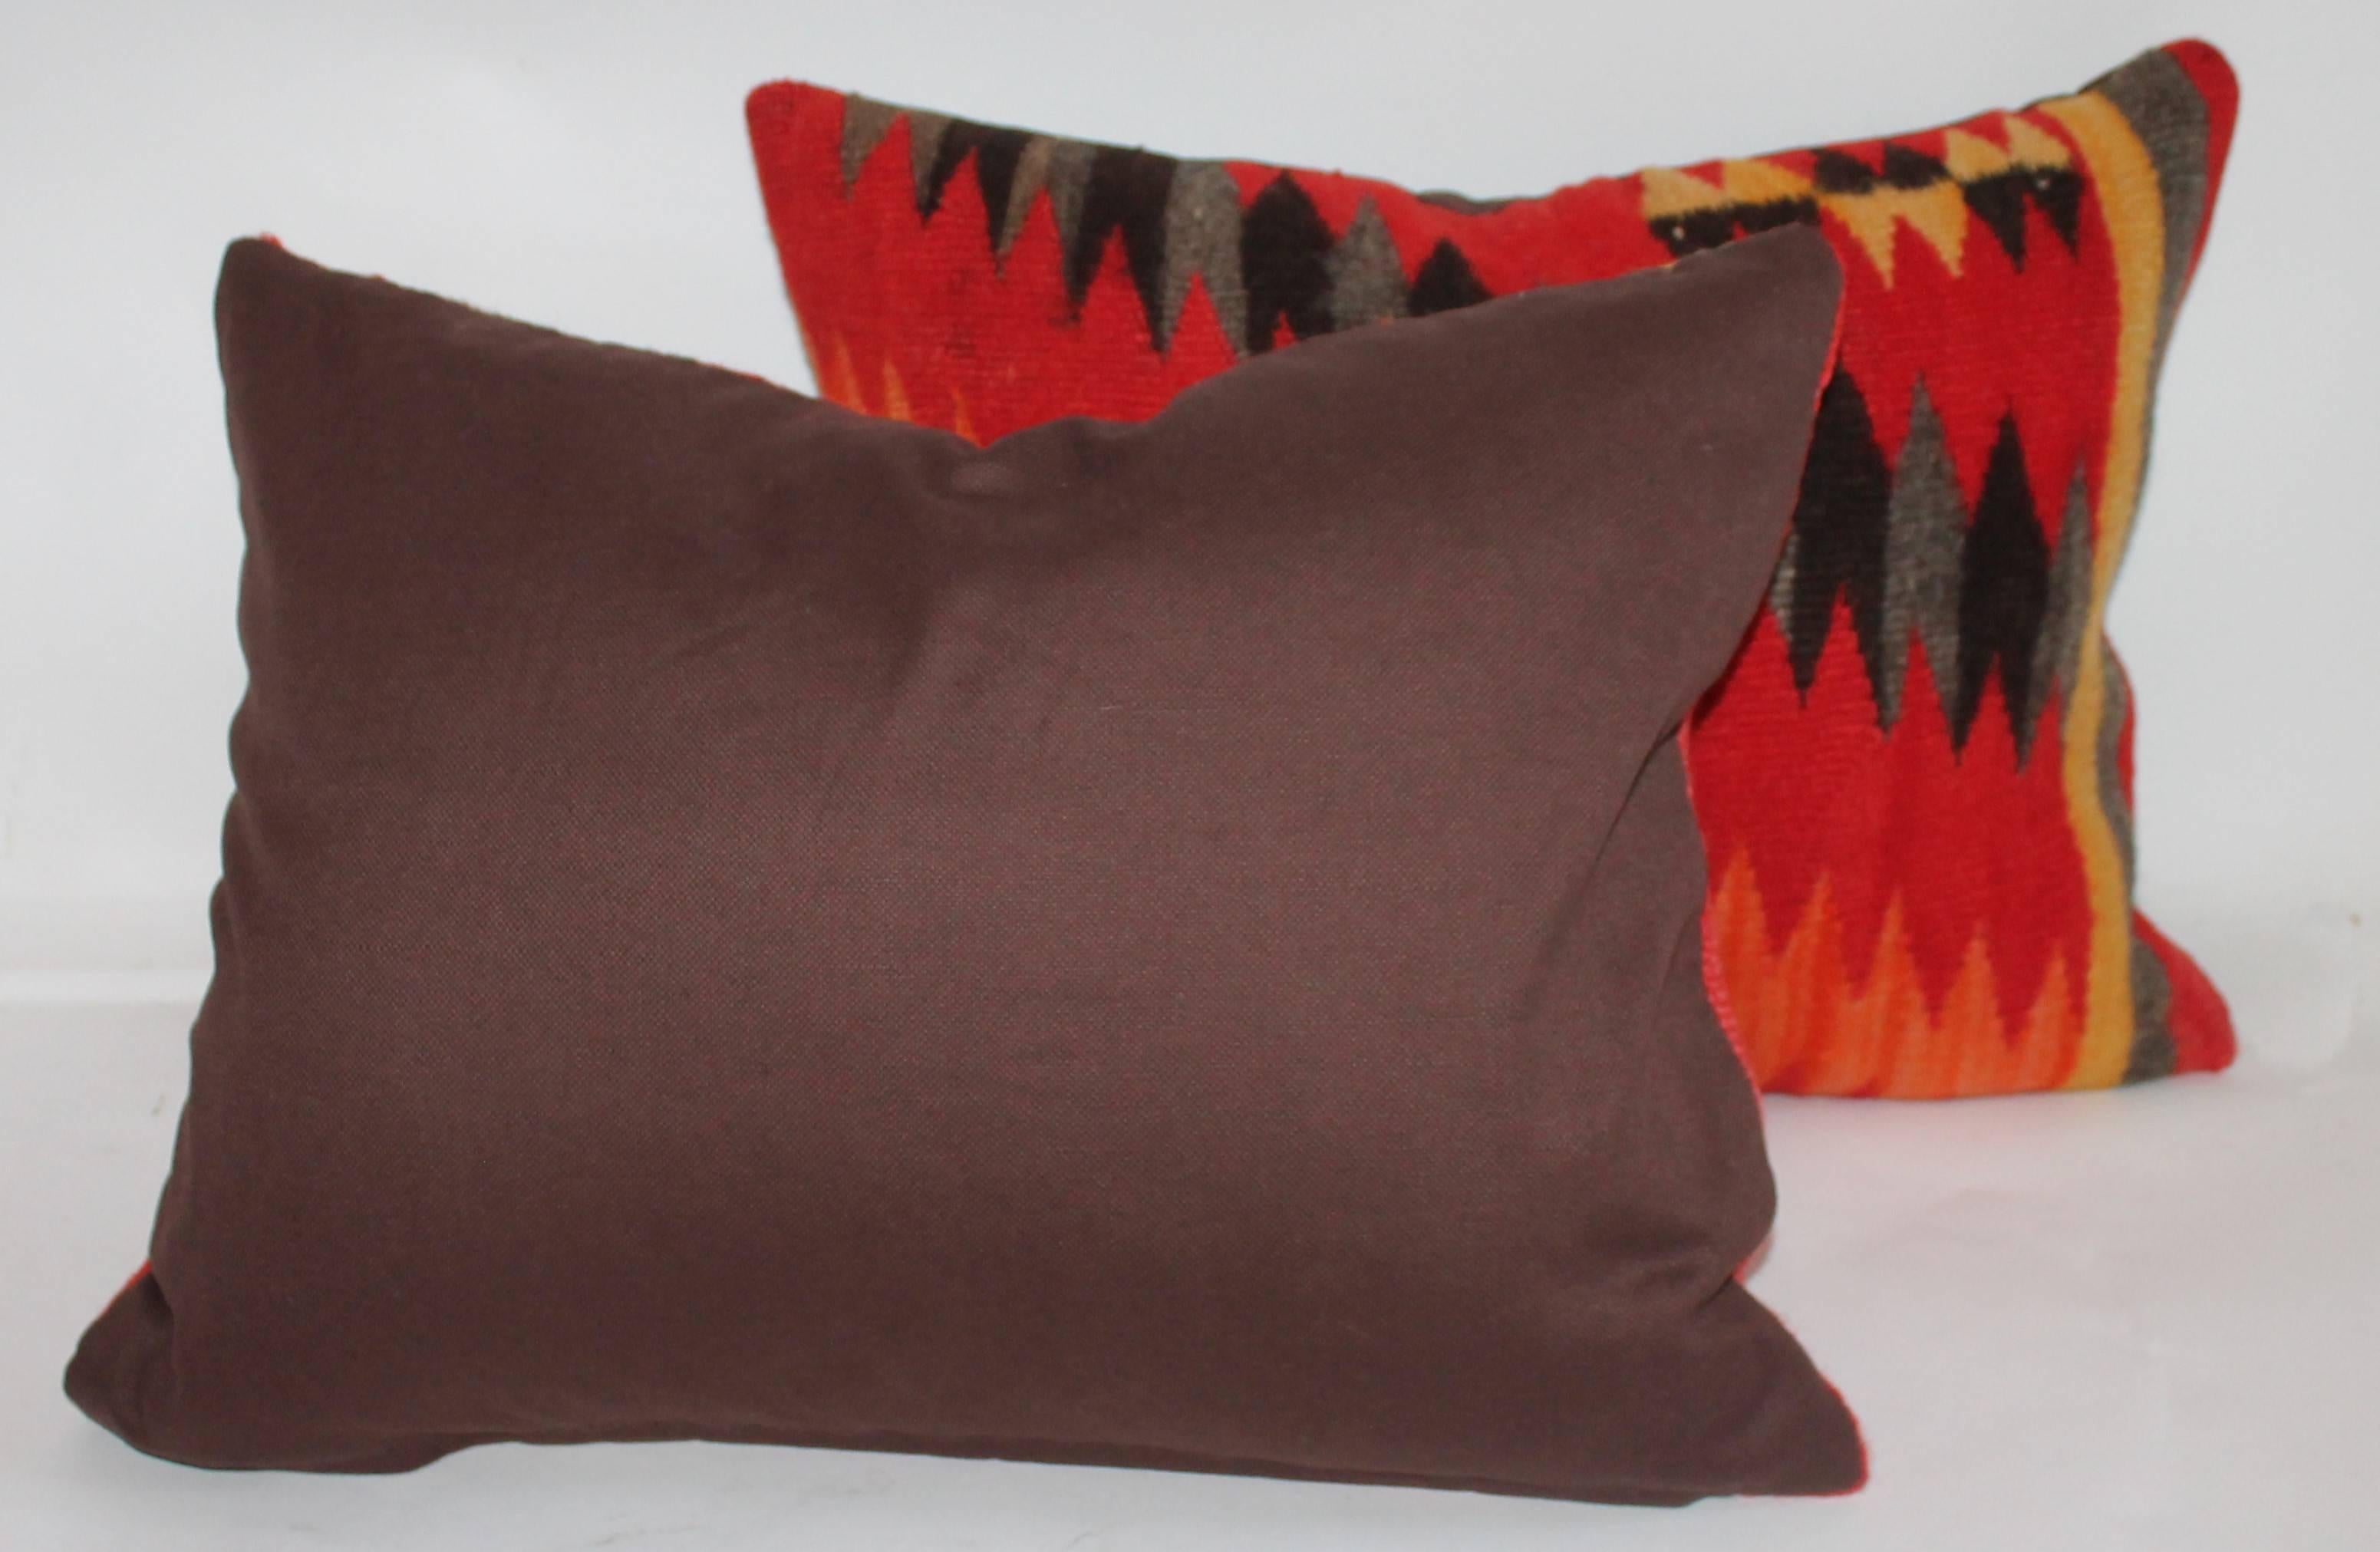 These streak of lighting pillows are in fine condition and have brown cotton linen backings. Sold as a pair.